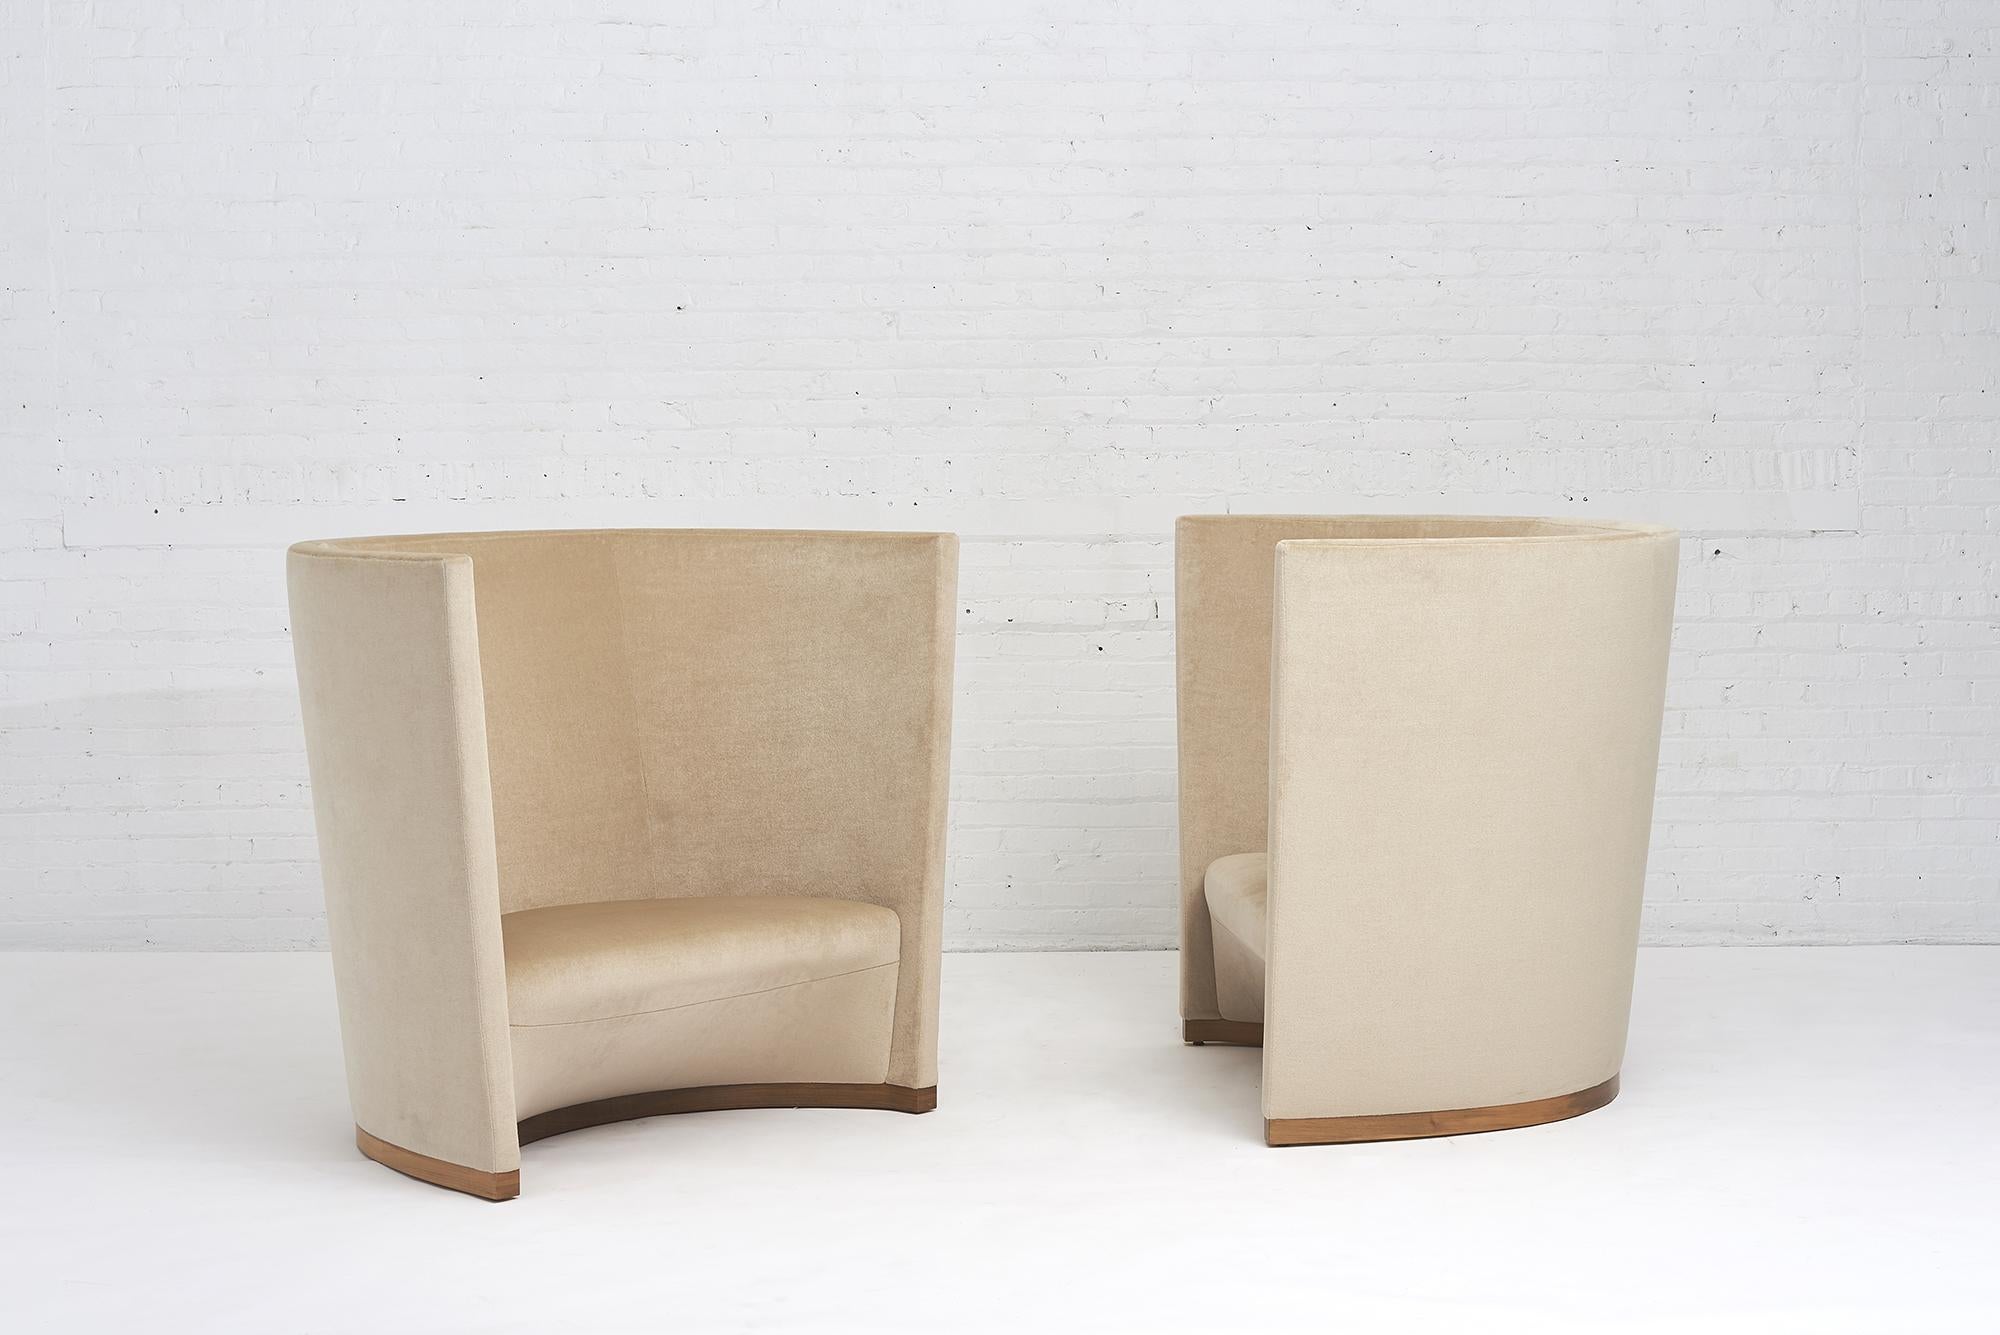 American Triumph Chairs by Christopher Pillet for Holly Hunt